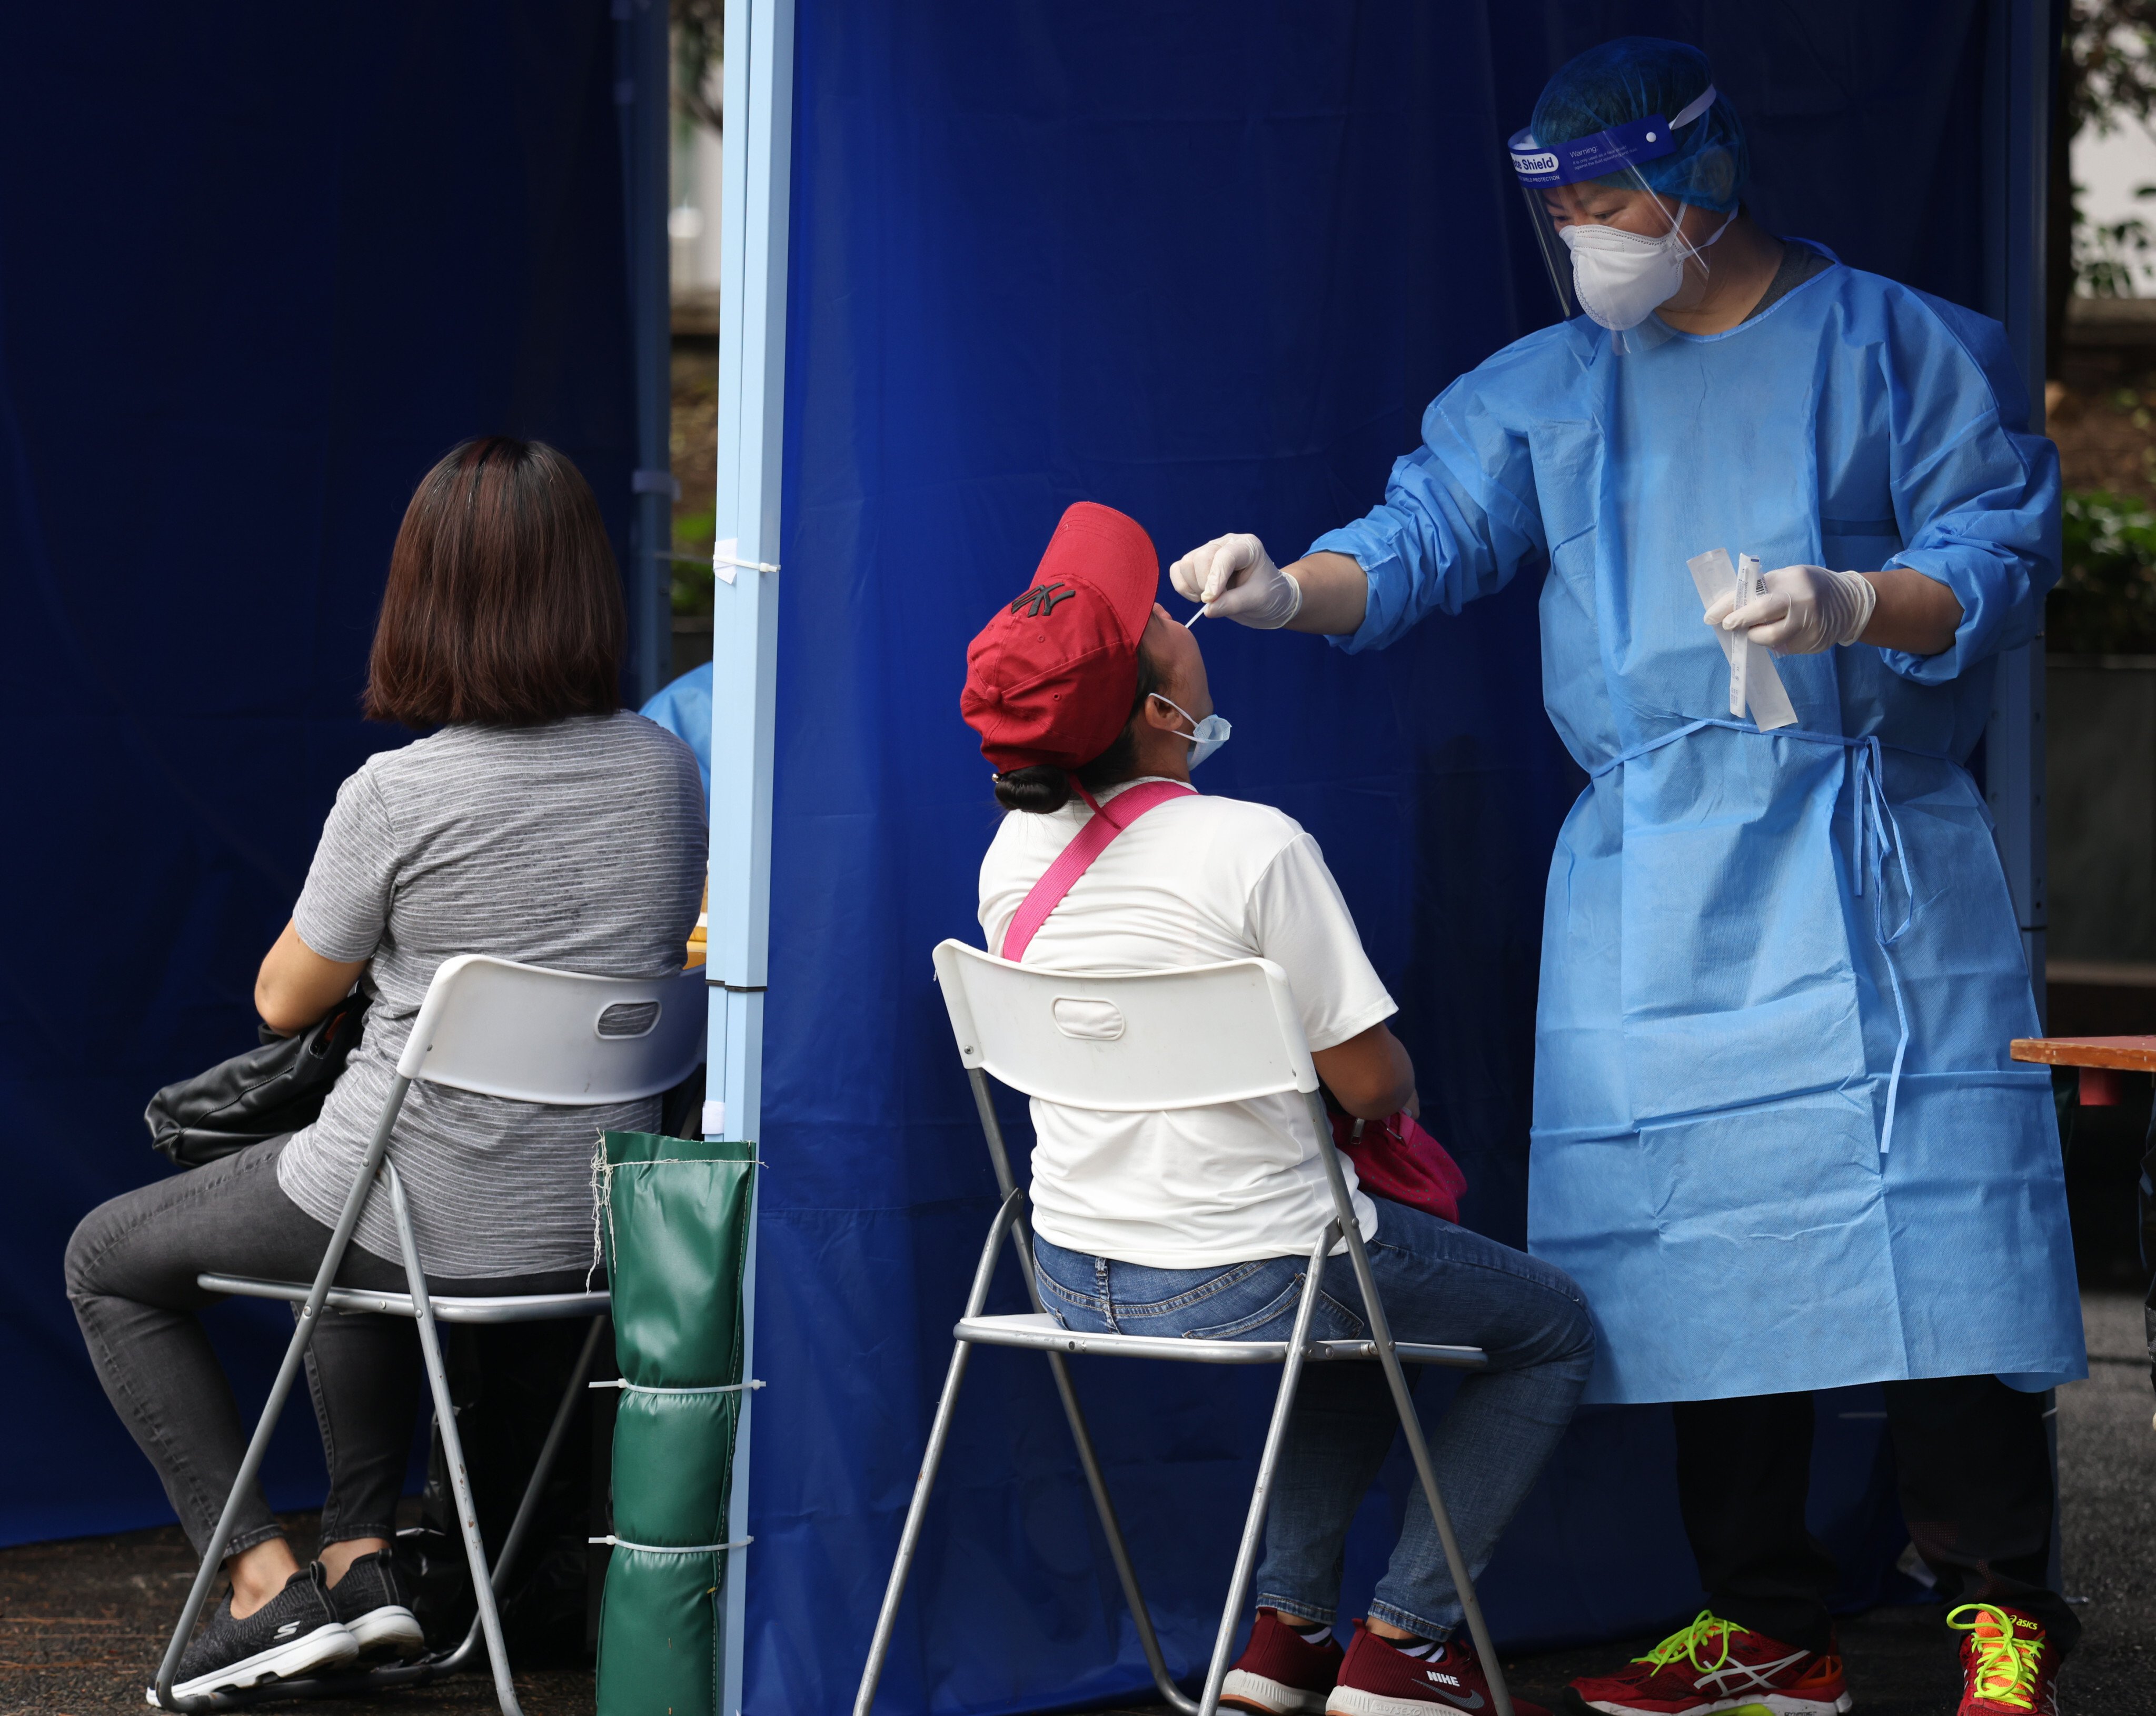 People are tested for Covid-19 in Chater Garden, Central, on May 22. Photo: Nora Tam